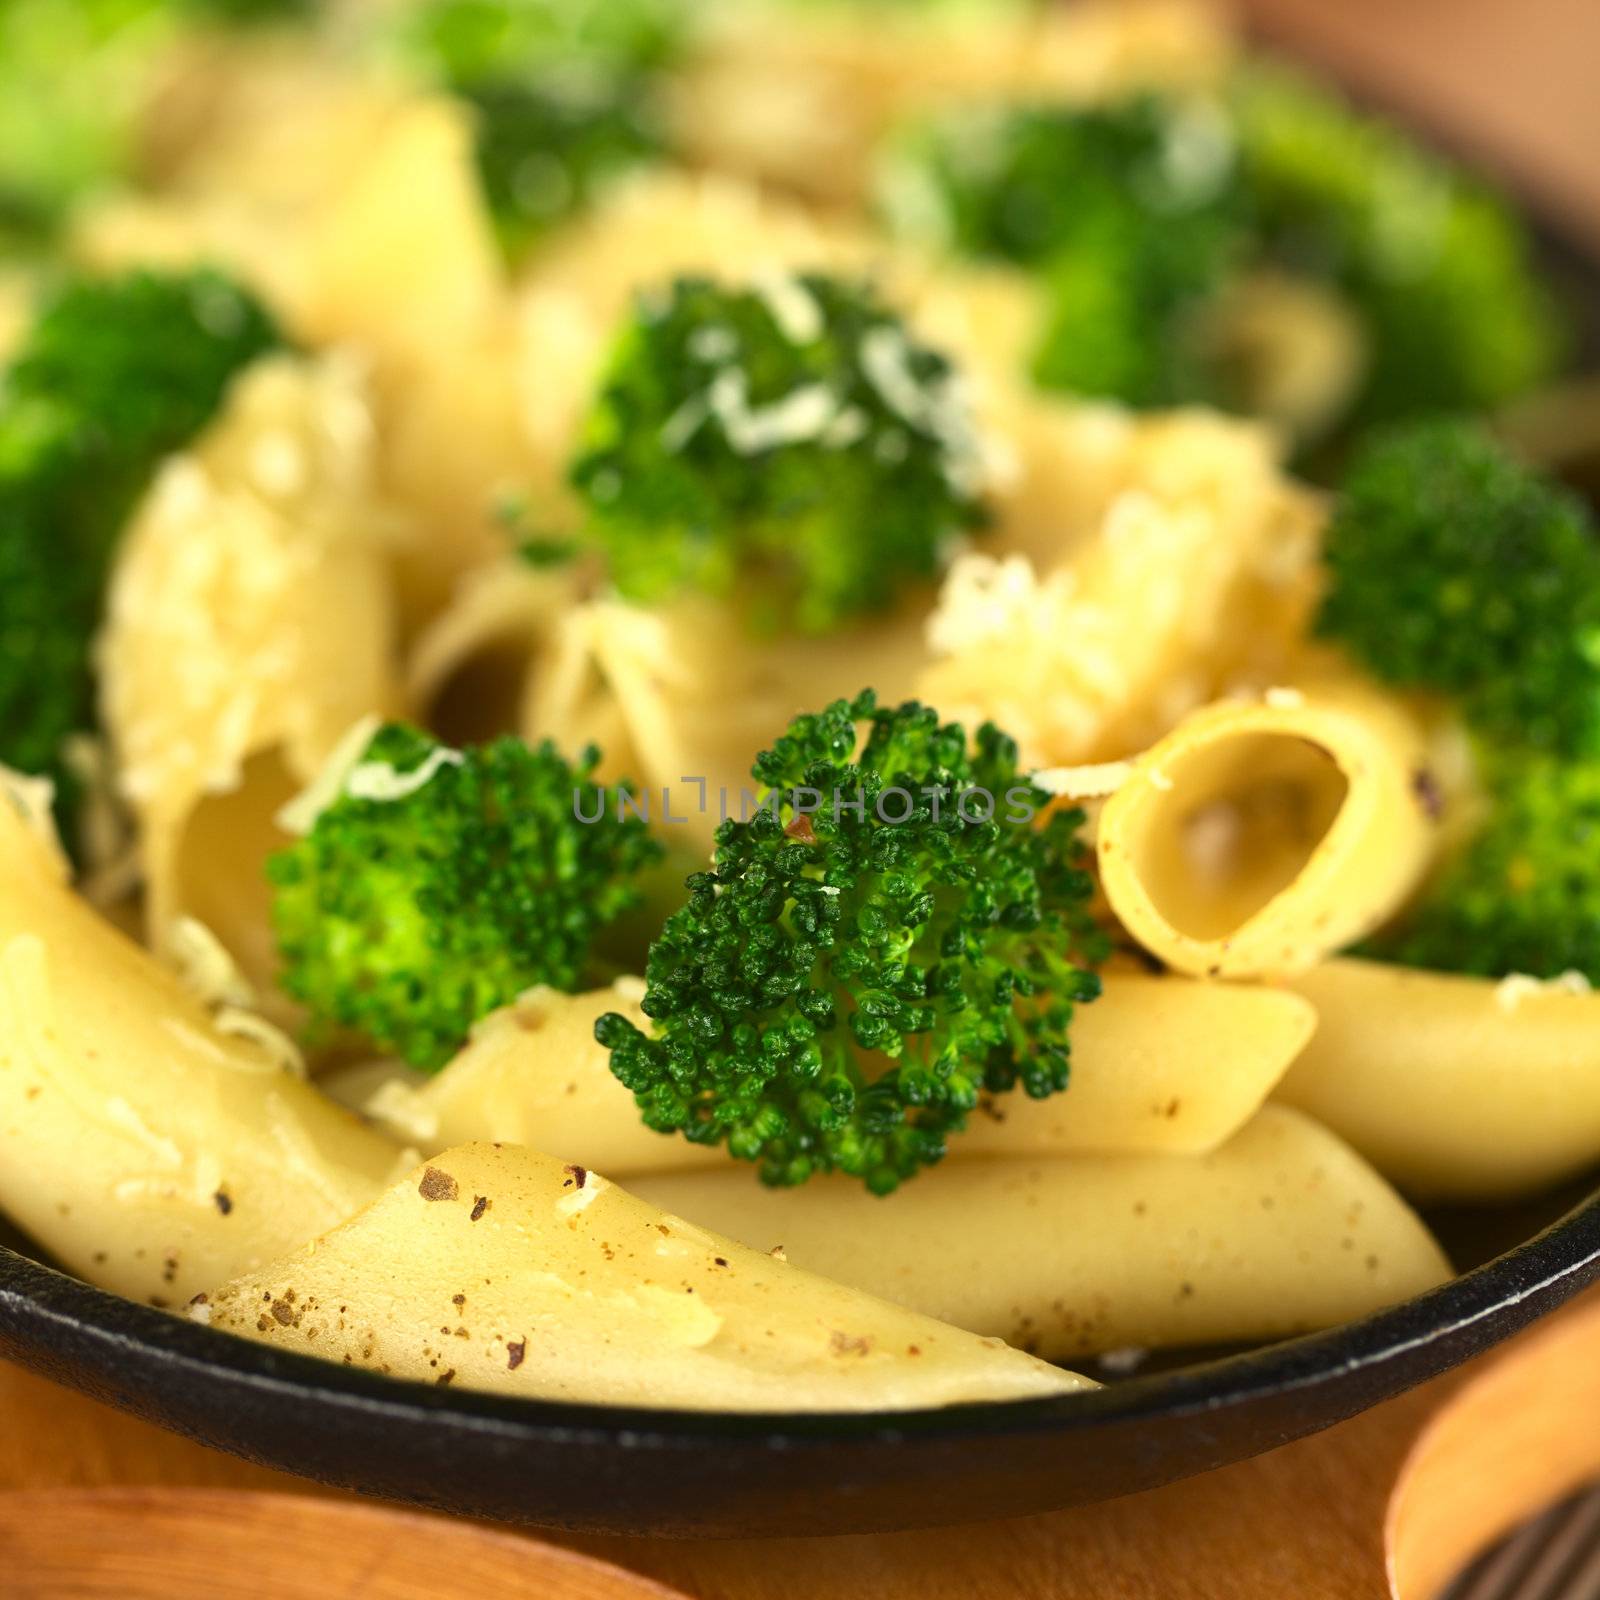 Broccoli and Pasta Baked with Cheese  by ildi